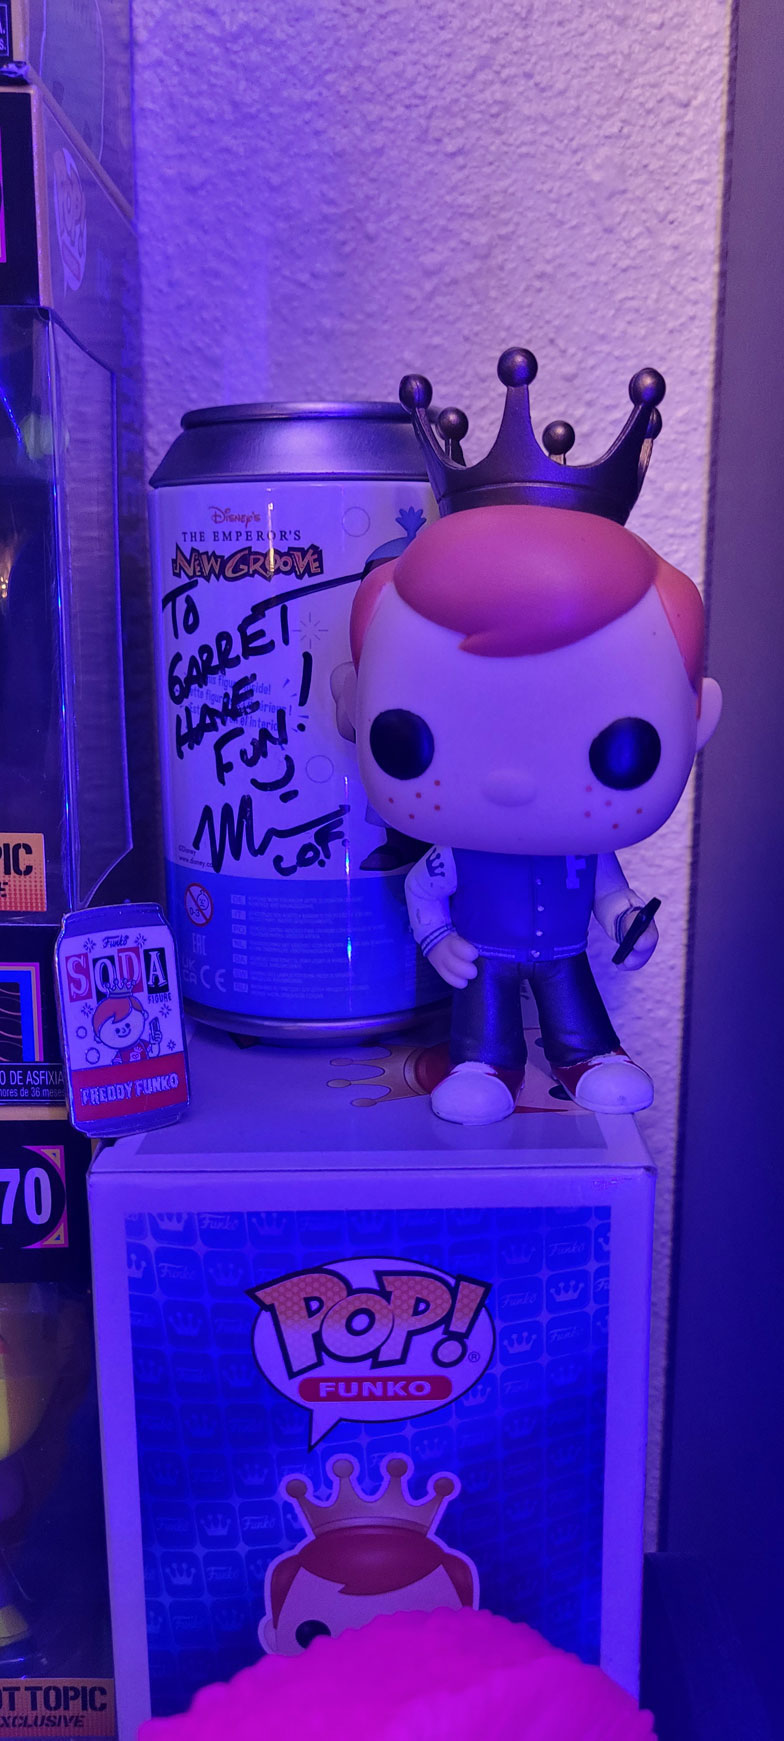 Garret's Social Media Freddy in front of a Funko Soda signed by Mike Becker